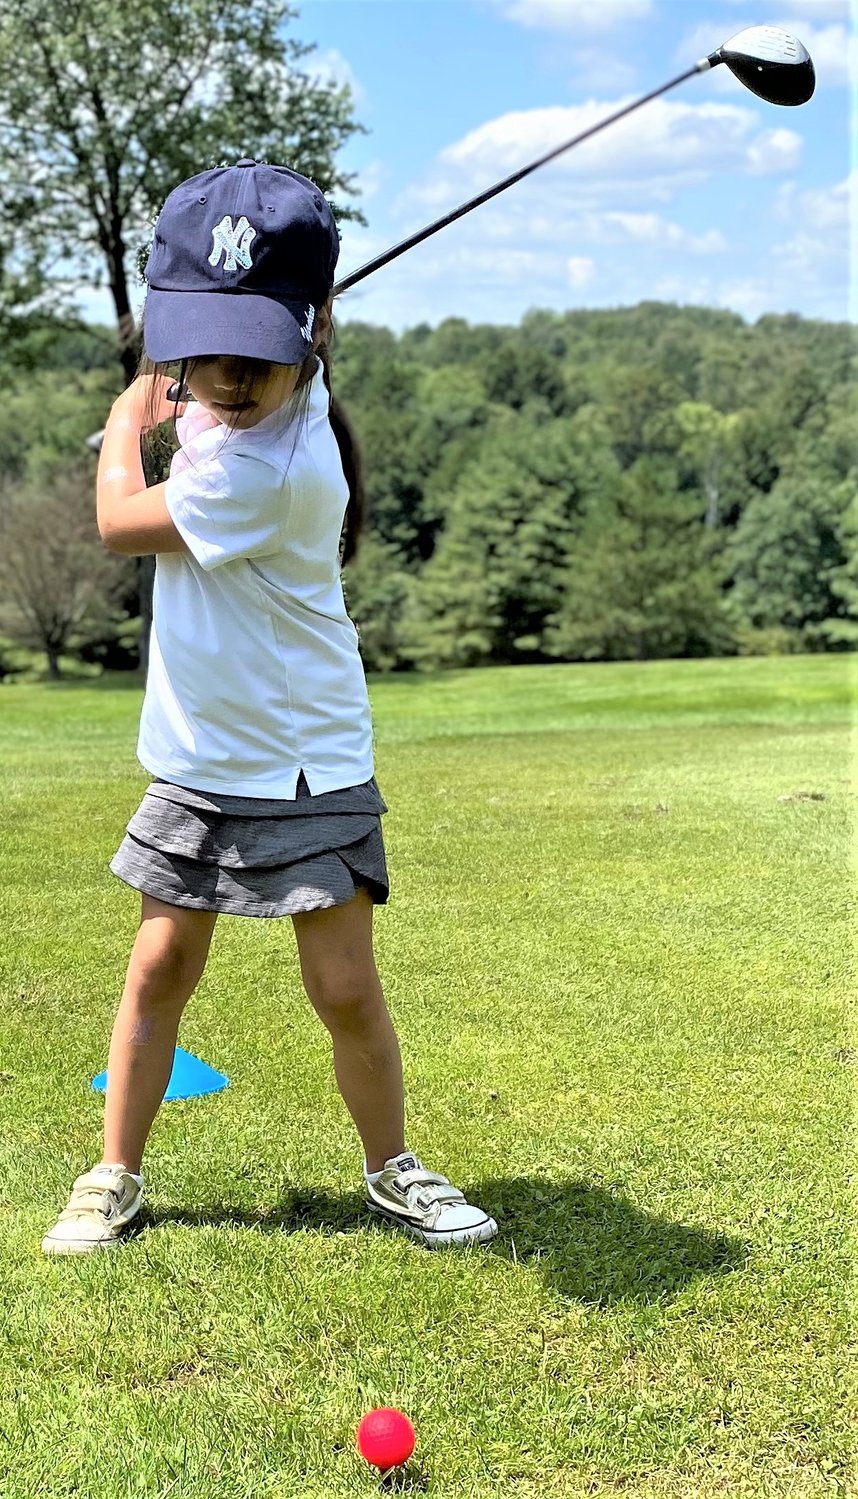 From left to right, camper Giuliana Gallo gets in a good swing, lefty Quinlian Kelly practices and Kevin Kubenik displays a nice golf swing.